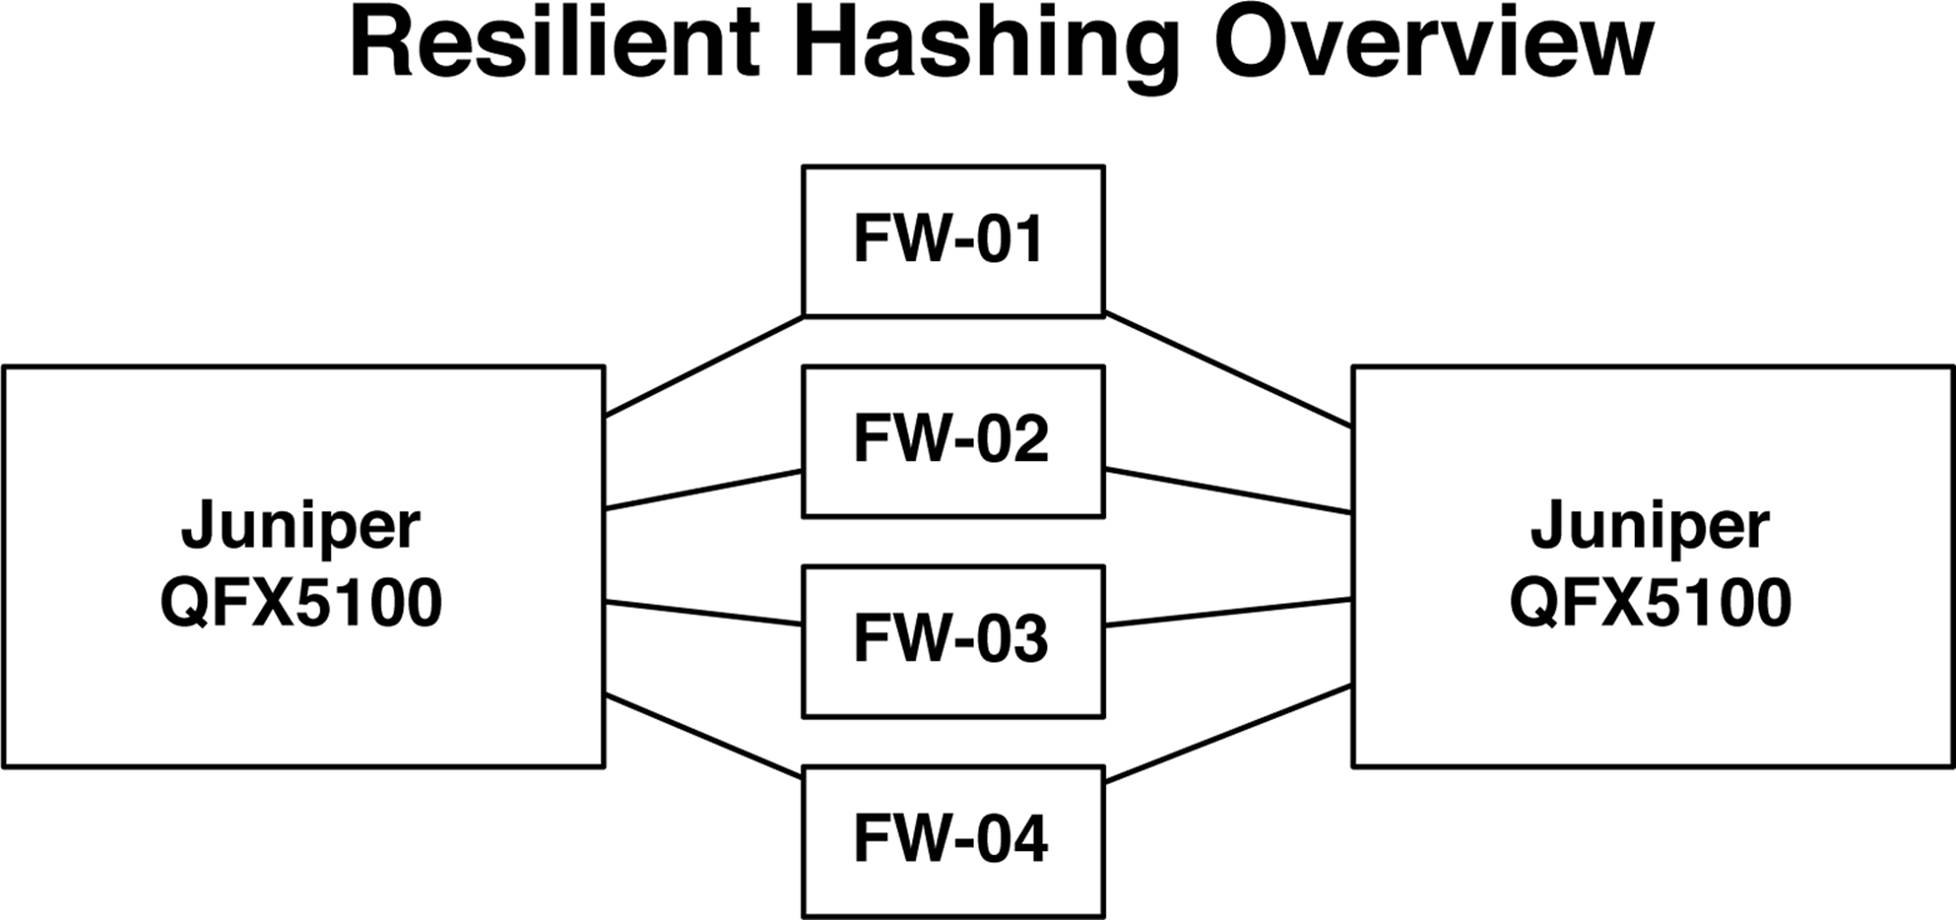 Resilient hashing overview